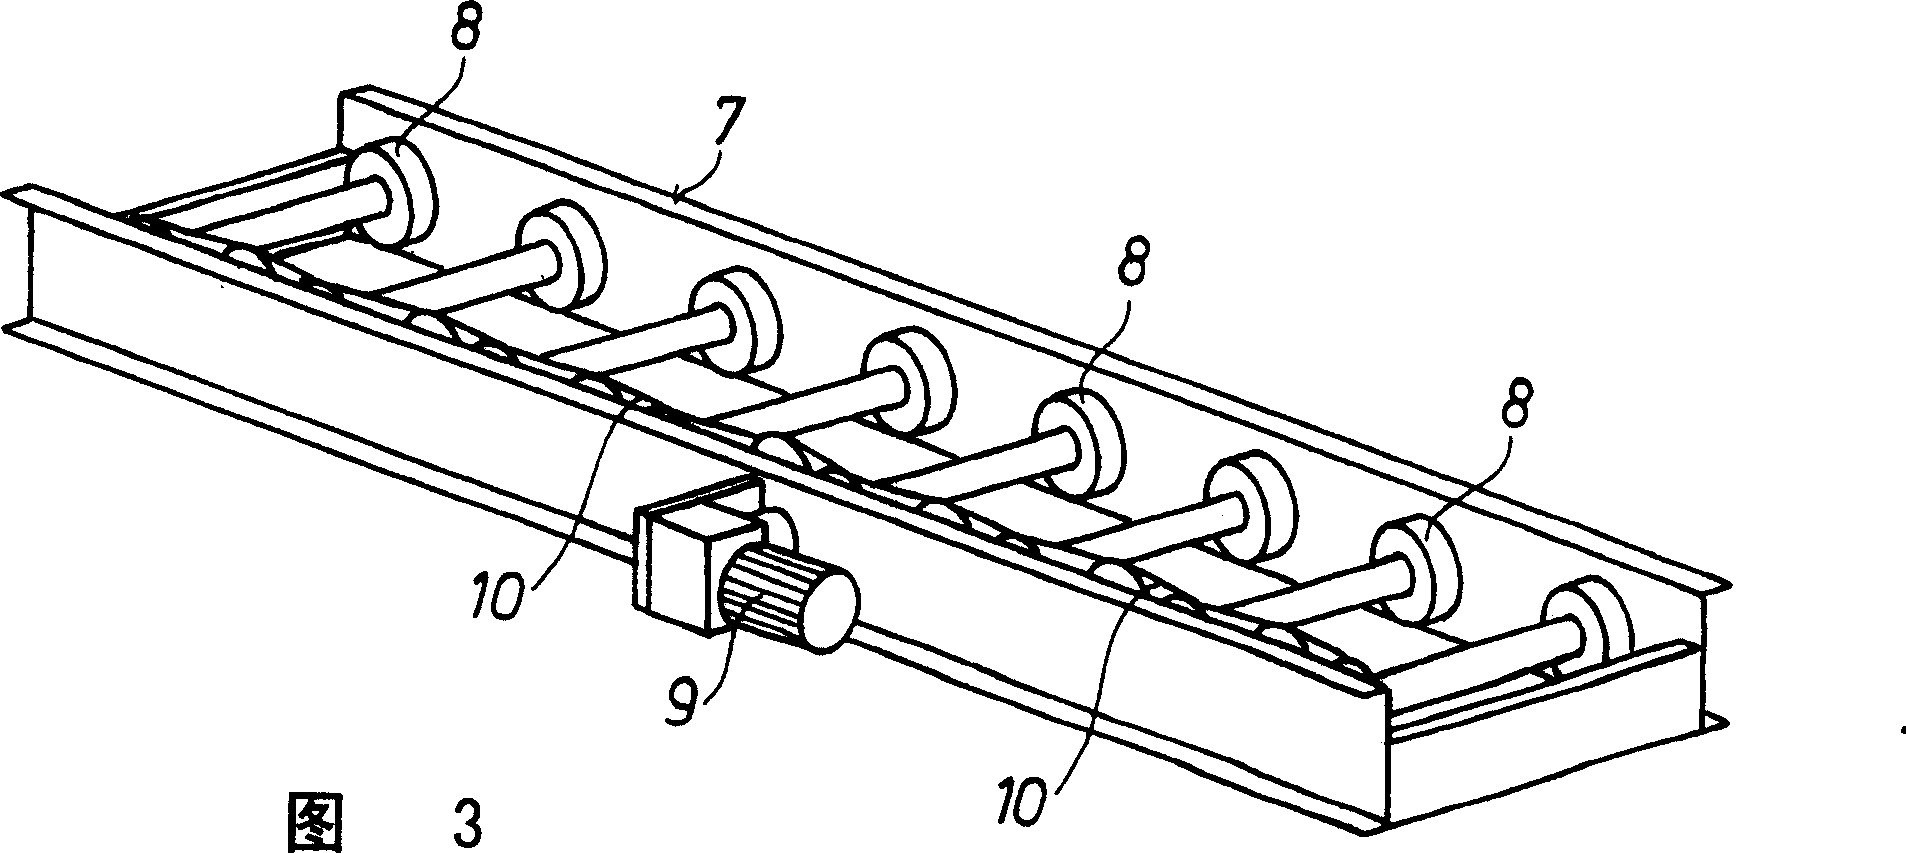 Device for delivery metal coil tape on tray